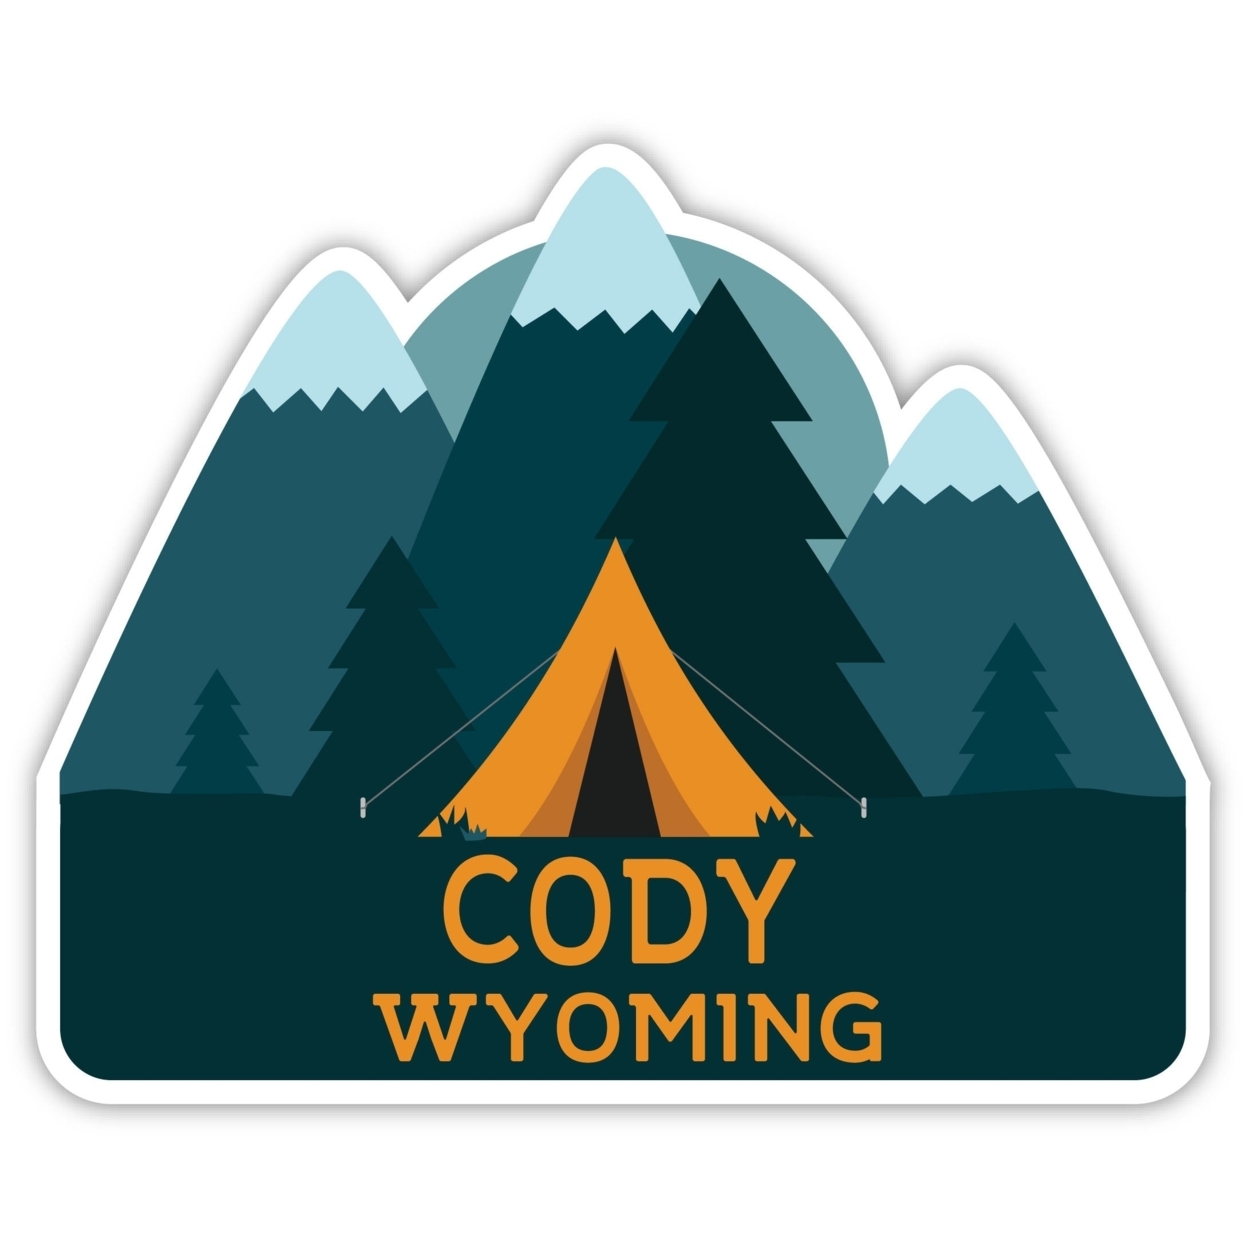 Cody Wyoming Souvenir Decorative Stickers (Choose Theme And Size) - Single Unit, 2-Inch, Camp Life